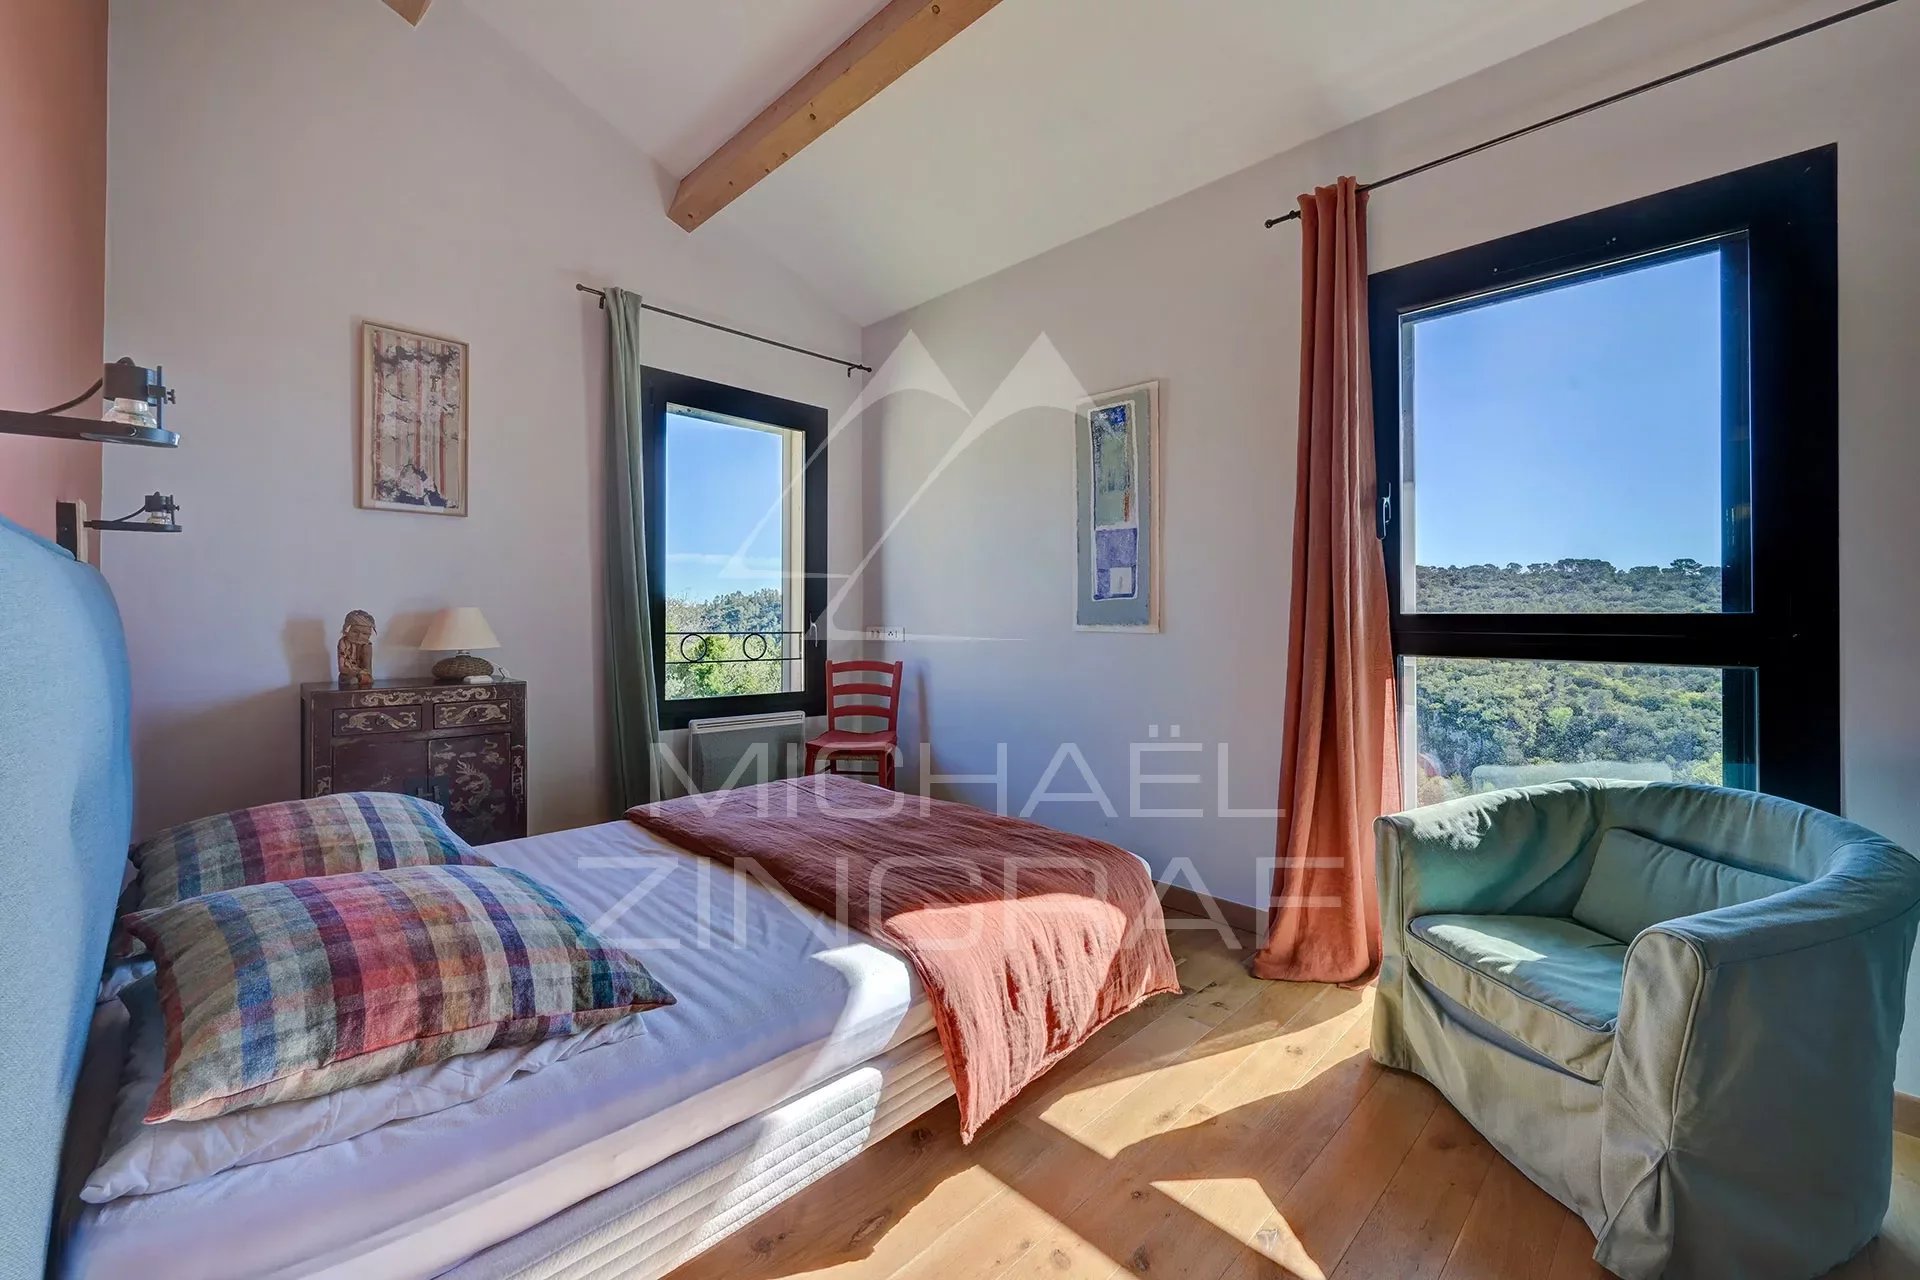 Centre Uzès - Superb house with incredible views over the Eure valley